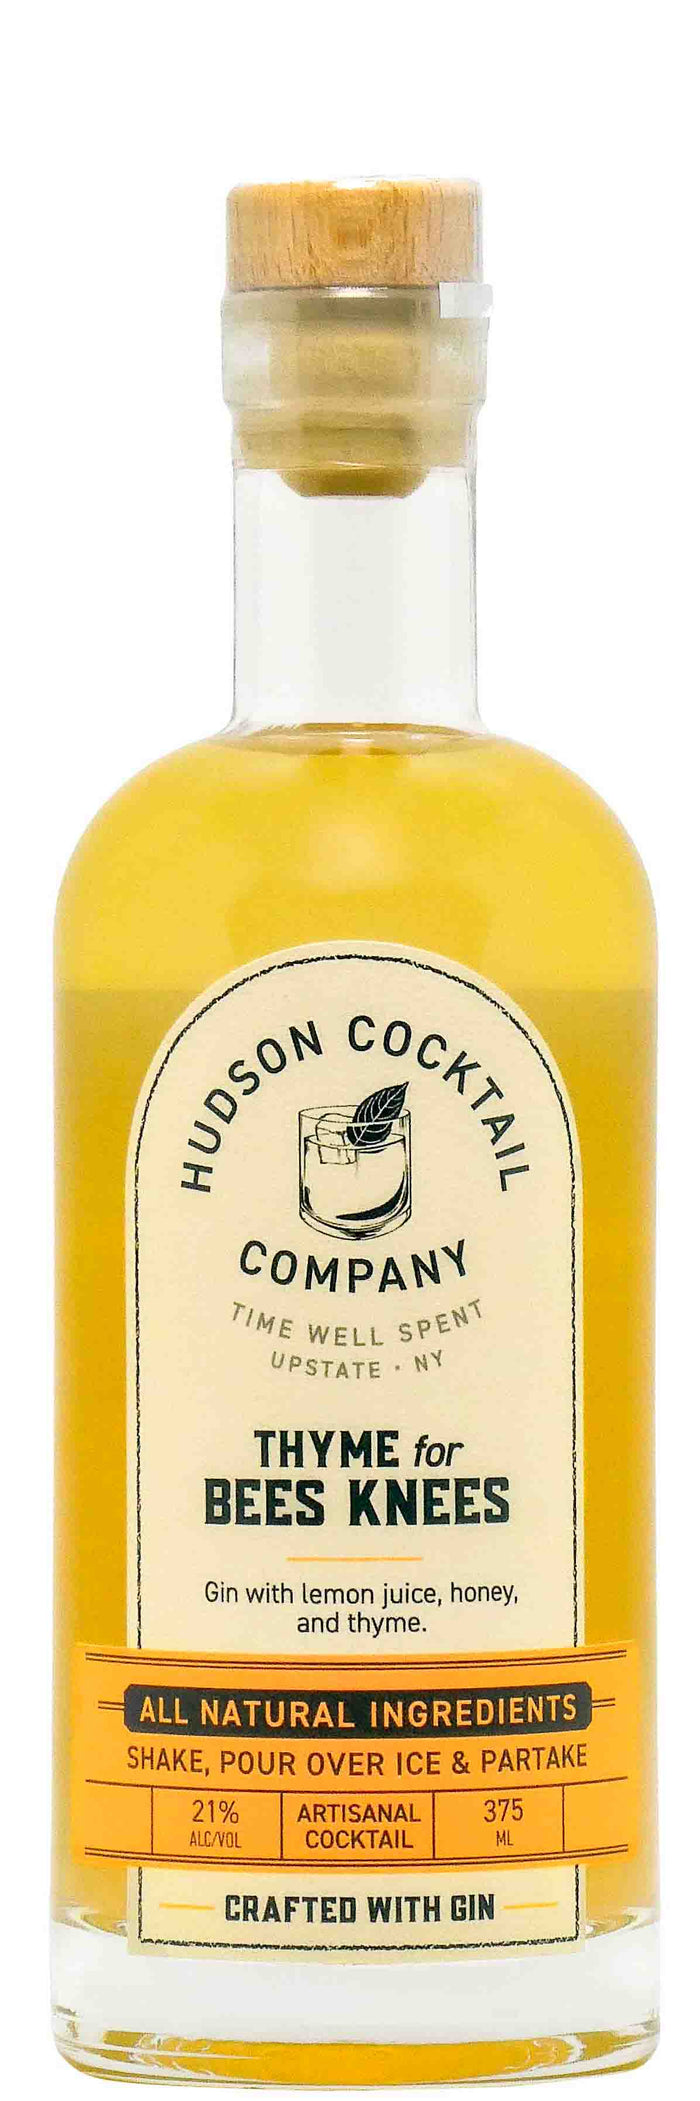 Hudson Cocktail Co. Thyme for Bees Knees